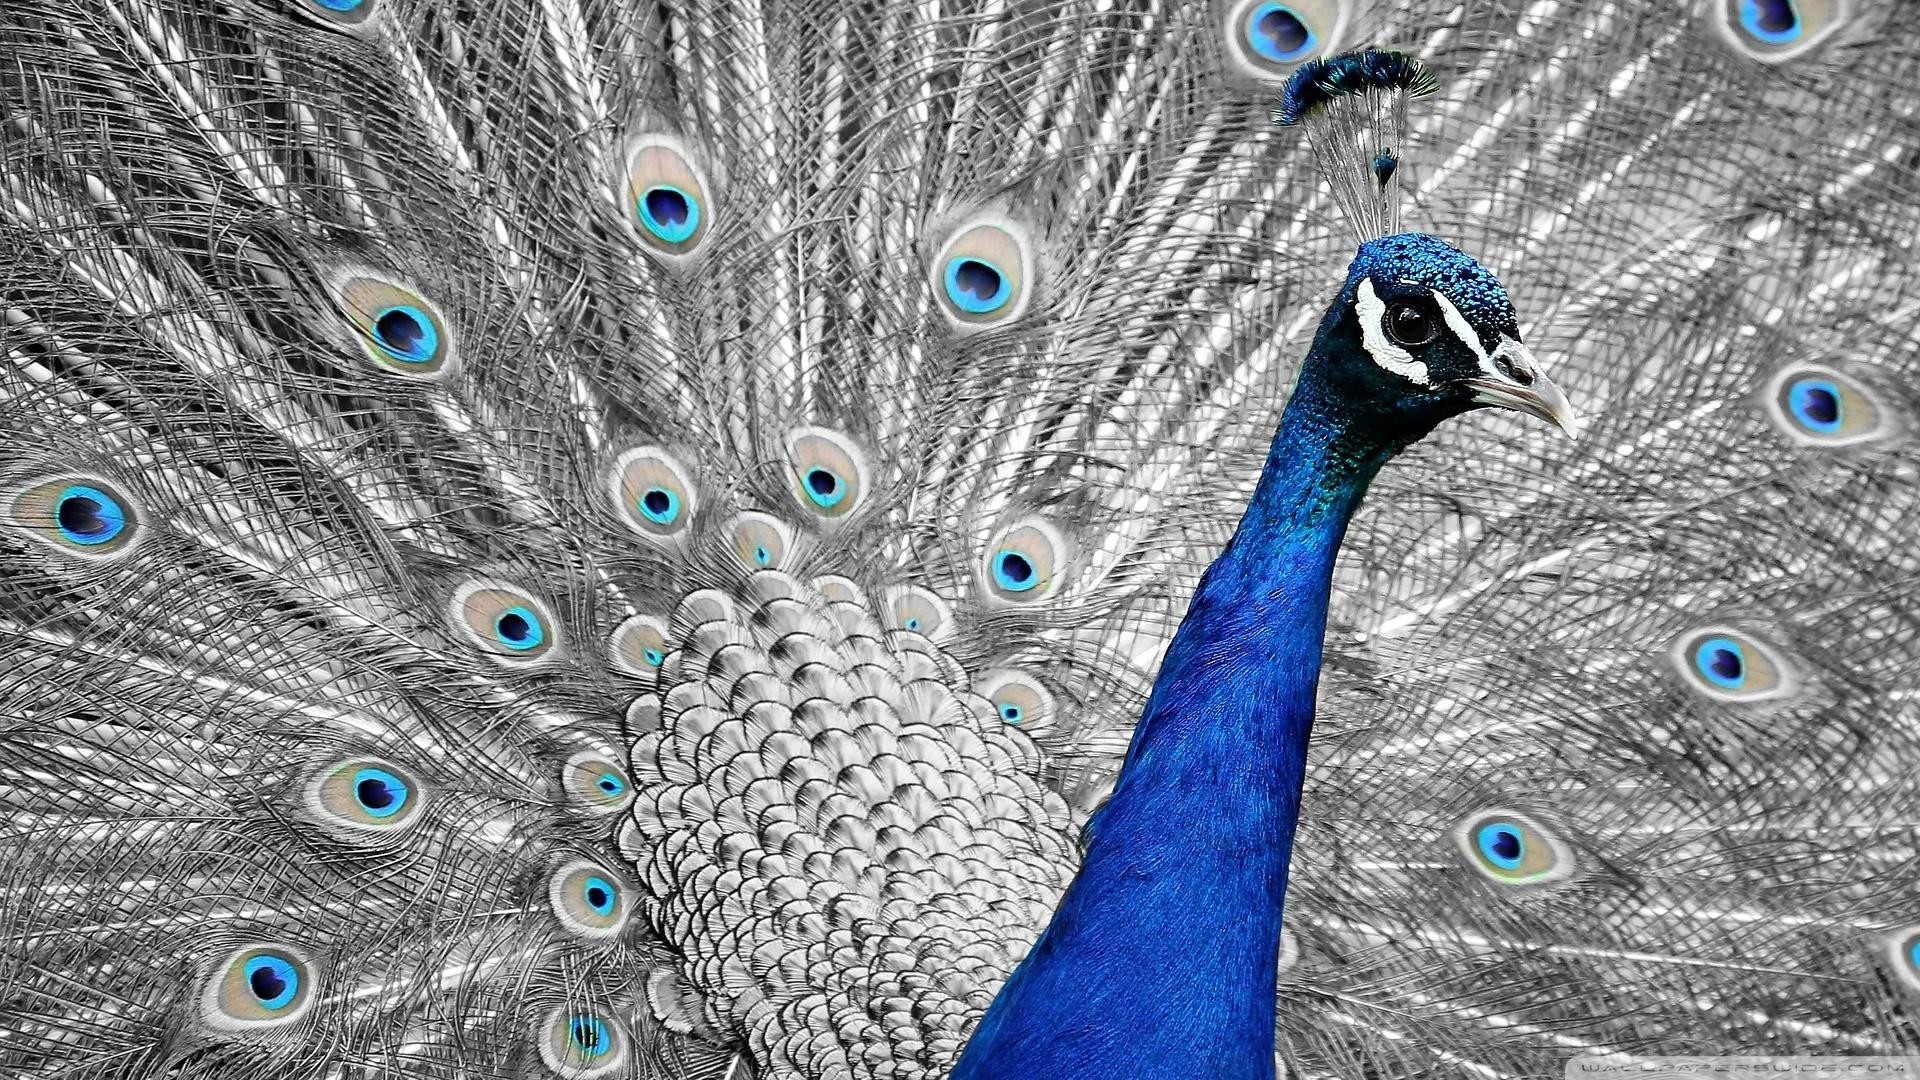 Blue, Green, And Brown Peacock Hd Wallpaper - Peacock 16 9 , HD Wallpaper & Backgrounds